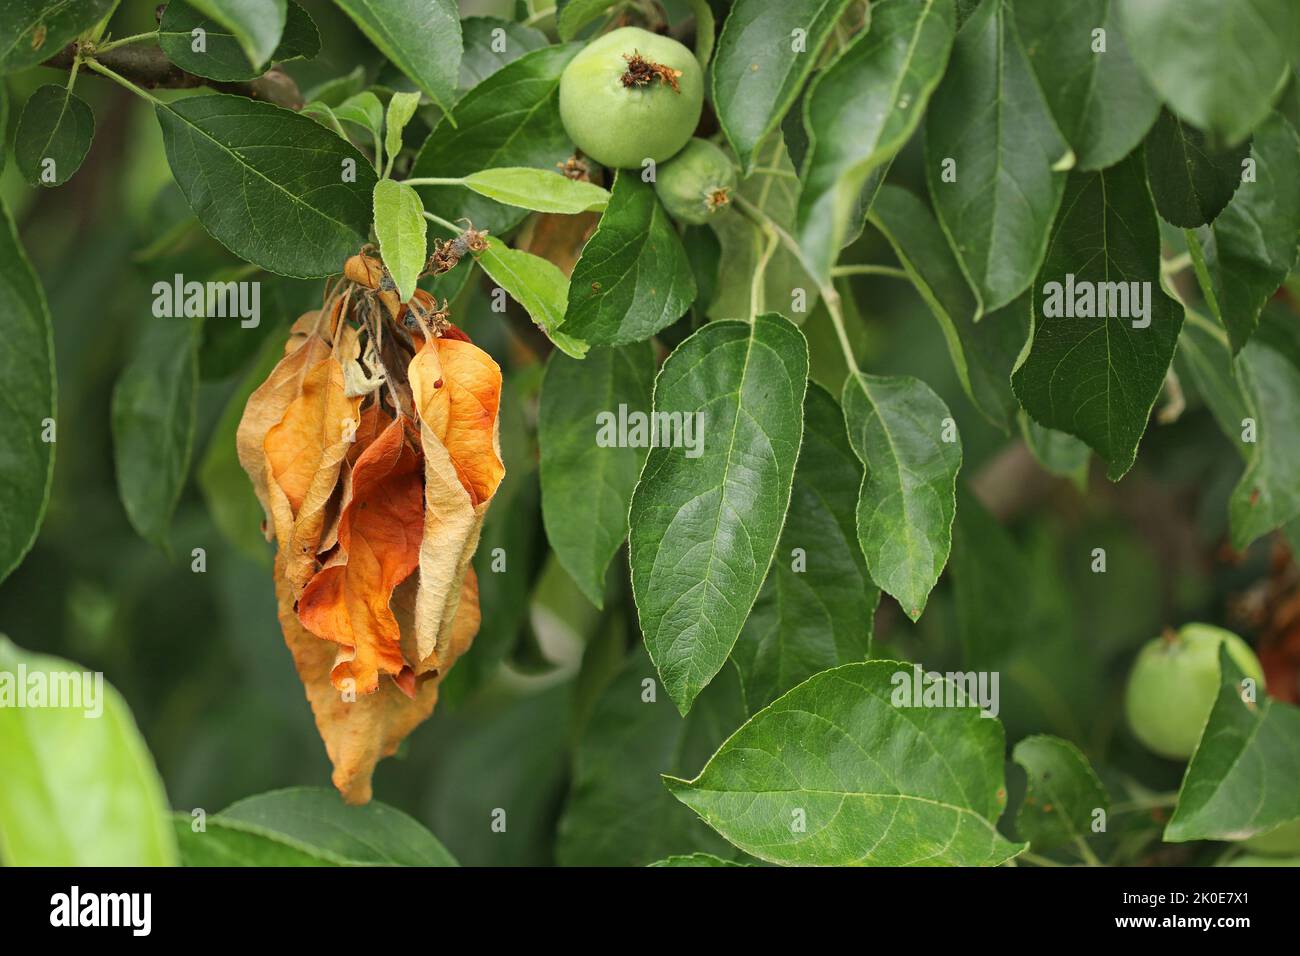 Diseases of fruit trees. Dried leaves on a apple tree. Stock Photo